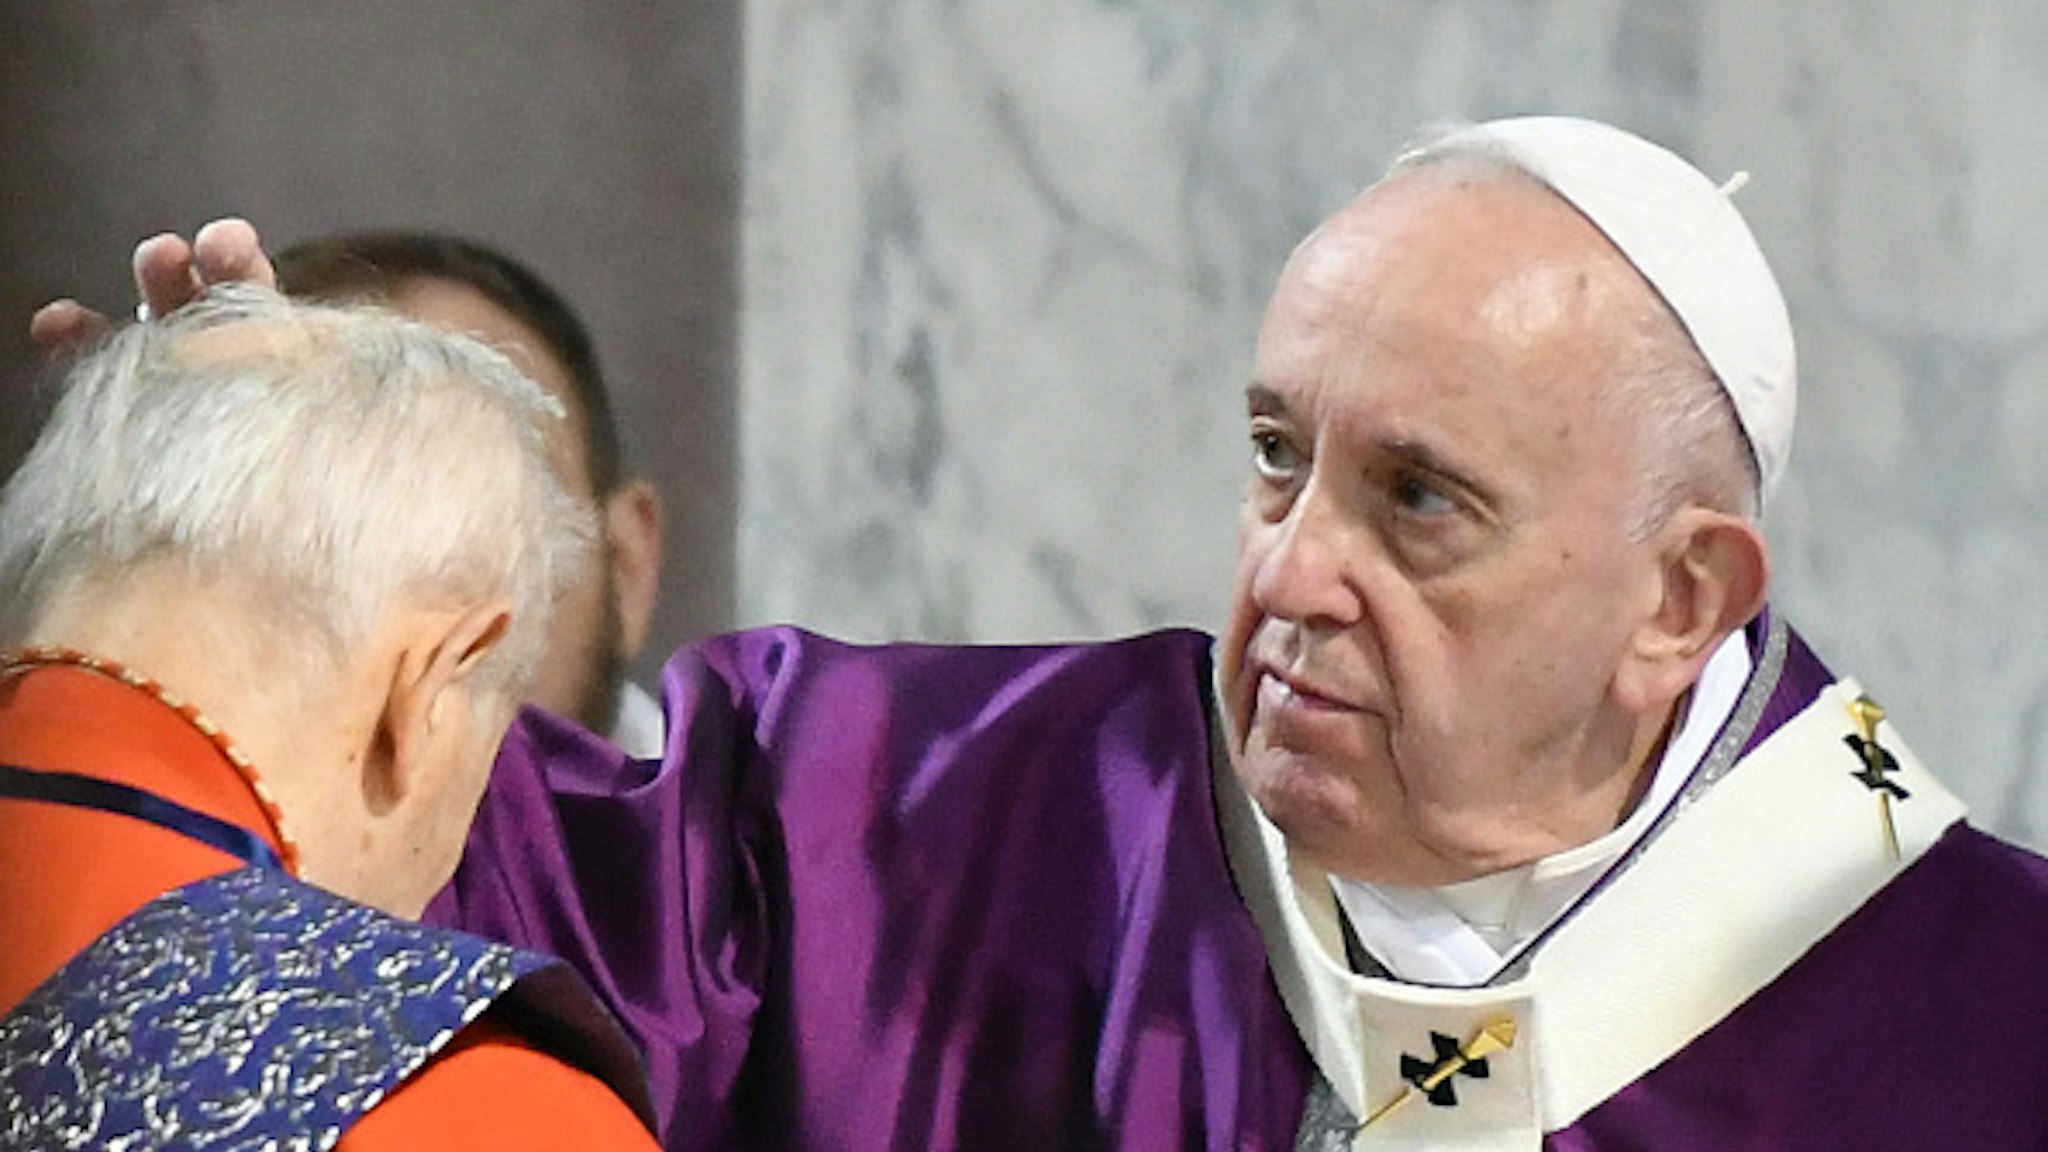 Cardinal Jozef Tomko receives the ashes on the forehead from Pope Francis during the Ash Wednesday mass which opens Lent, the forty-day period of abstinence and deprivation for Christians before Holy Week and Easter, on February 26, 2020, at the Santa Sabina church in Rome.